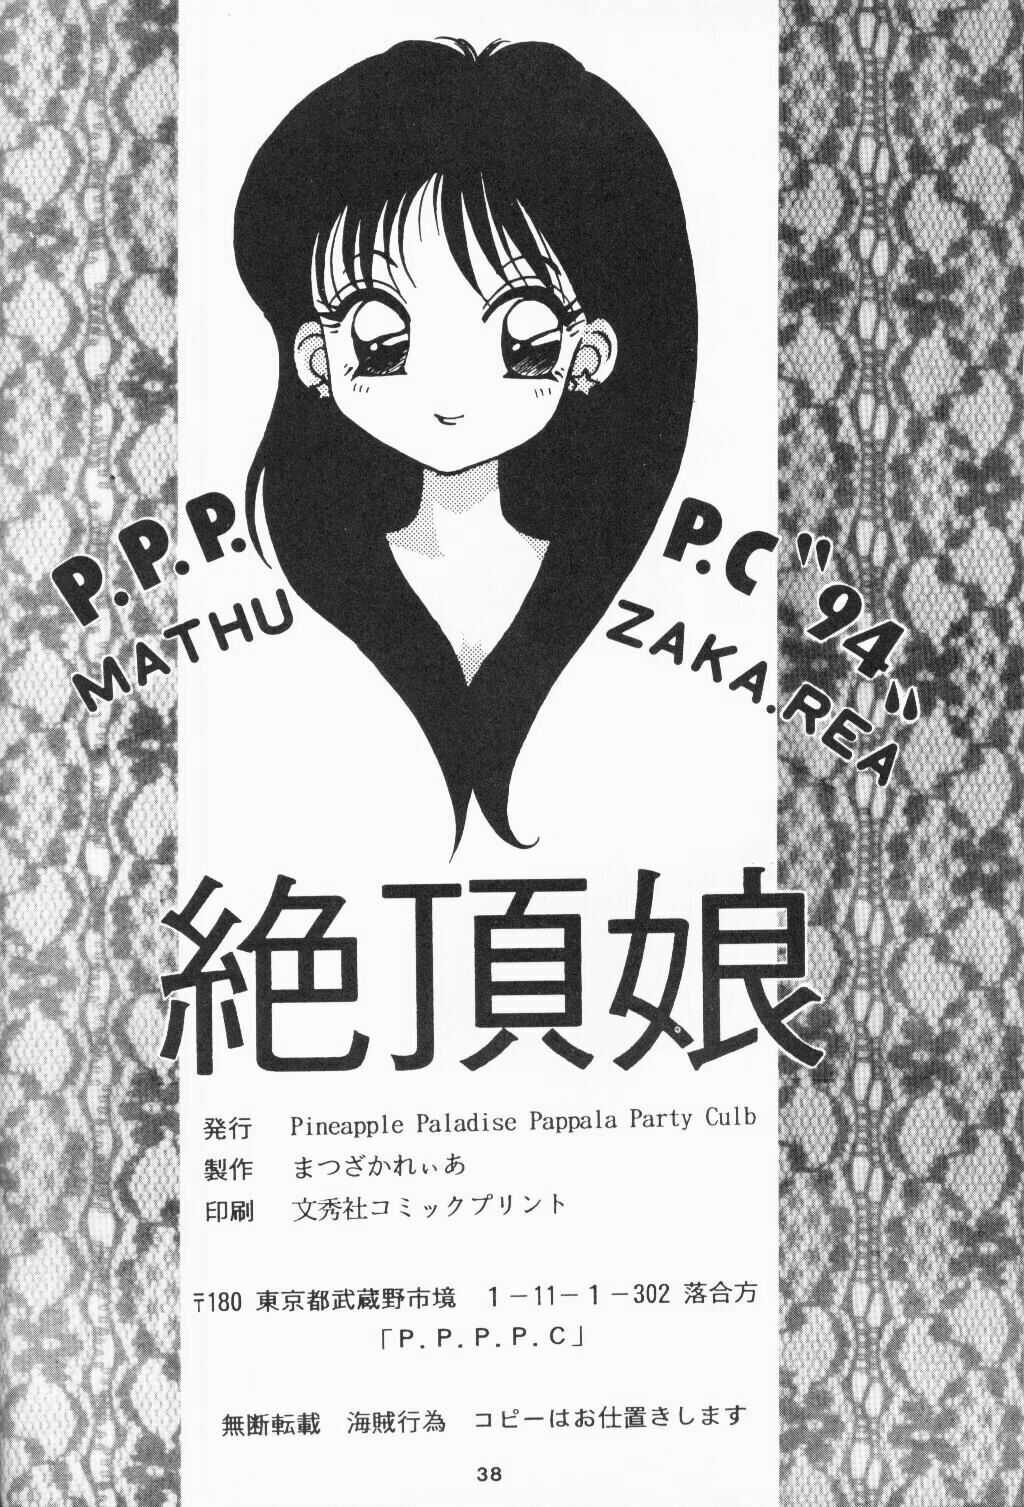 [Pineapple Paradise Pappala Party Club] Zecchou Musume / Ecstasy Girls (Sailor Moon) 絶頂娘